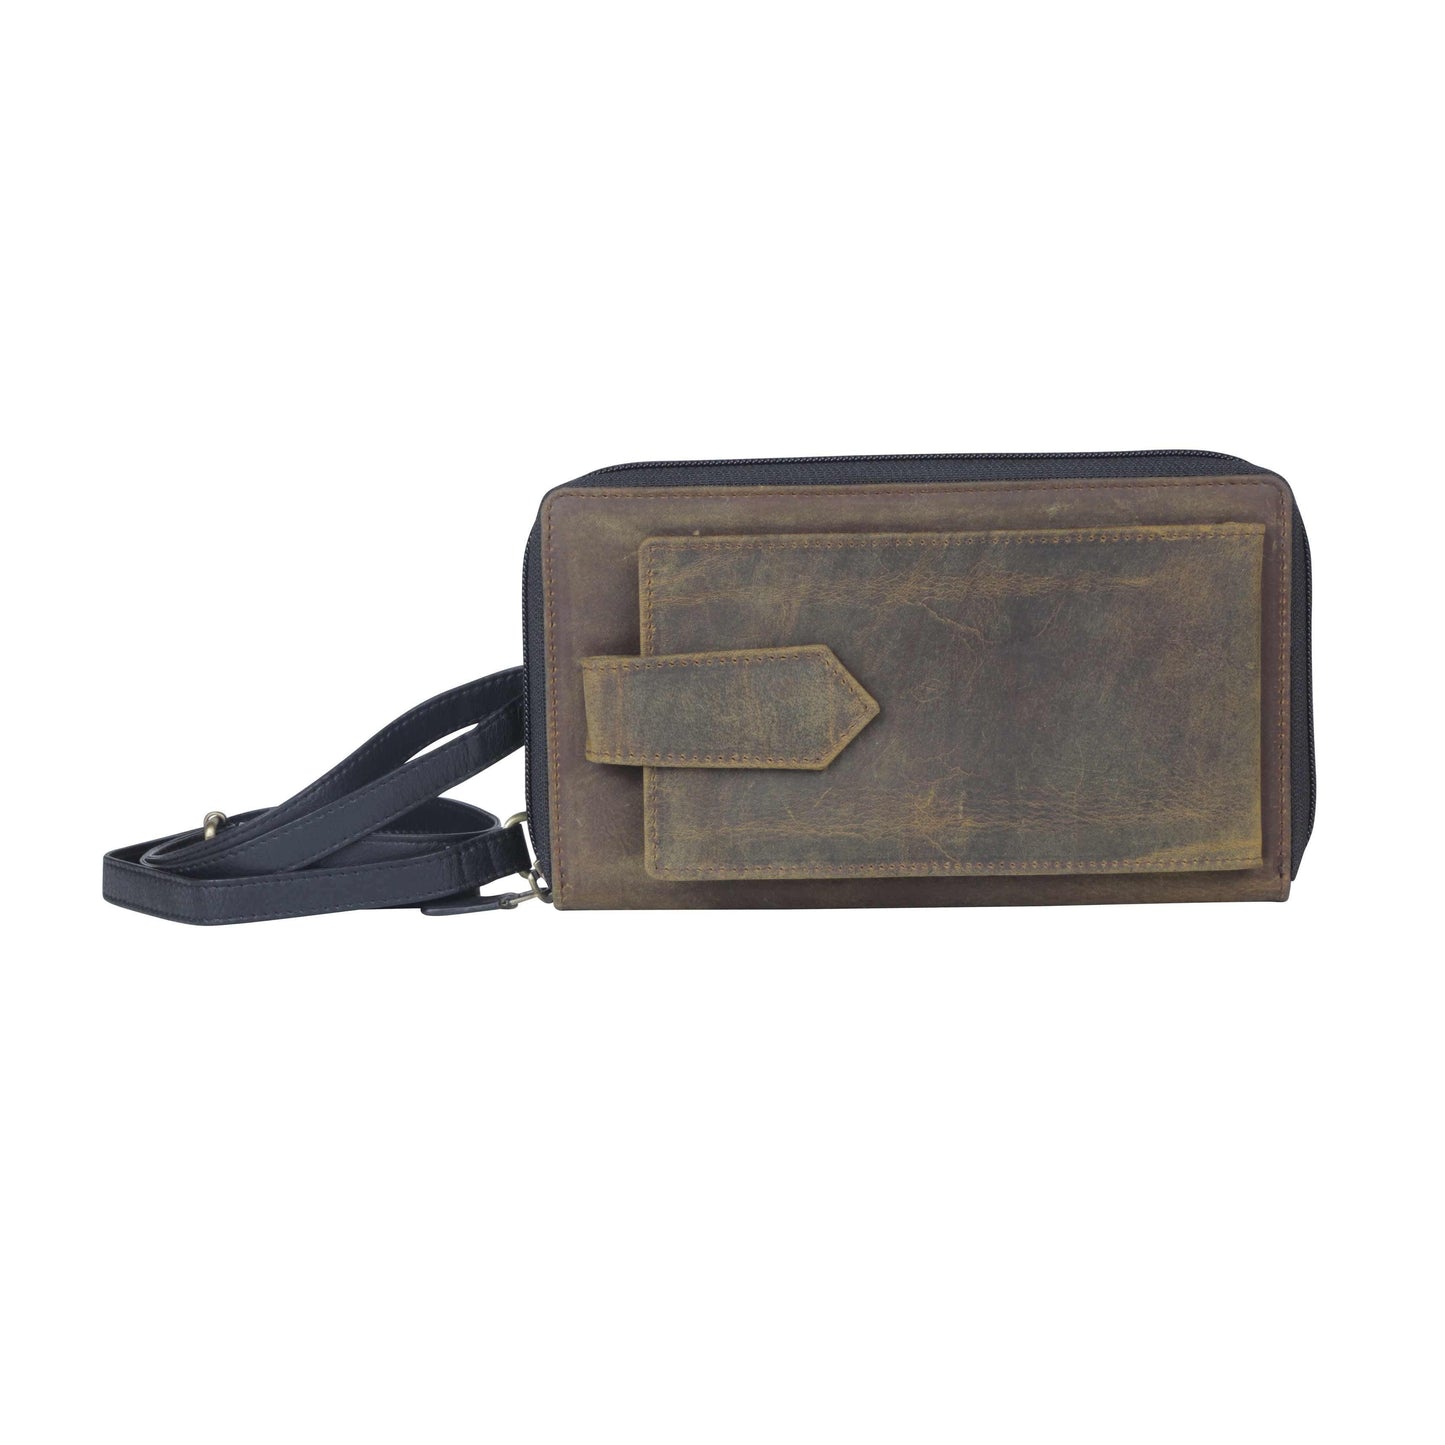 Solemn Brown Leather Phone Holder Wallet from Brooklyn Bag at Moosestrum.com